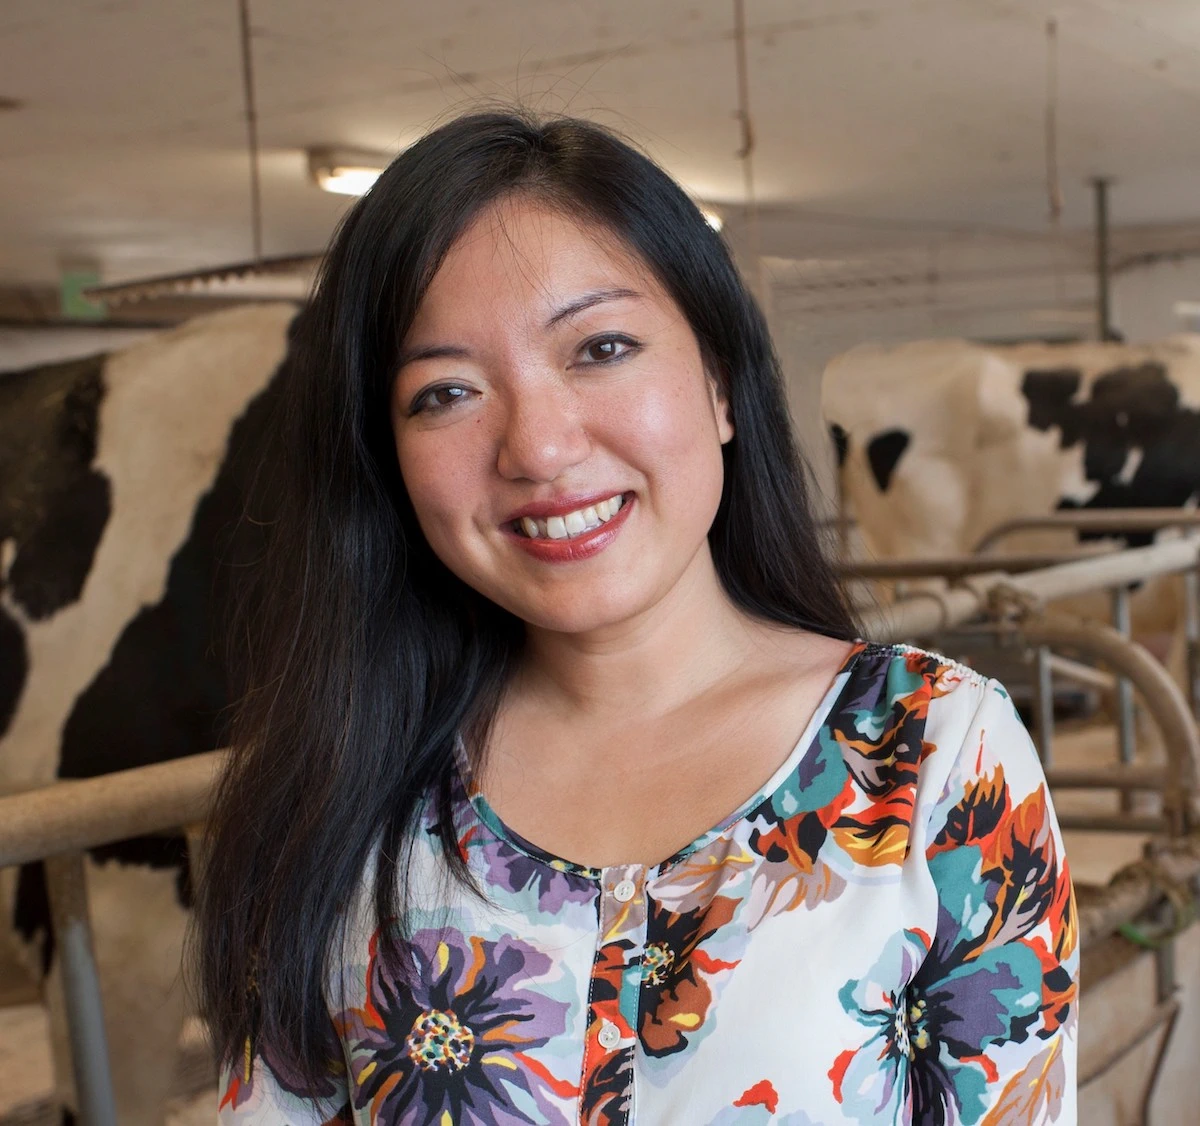 MSU professor Felicia Wu standing with cows in the background